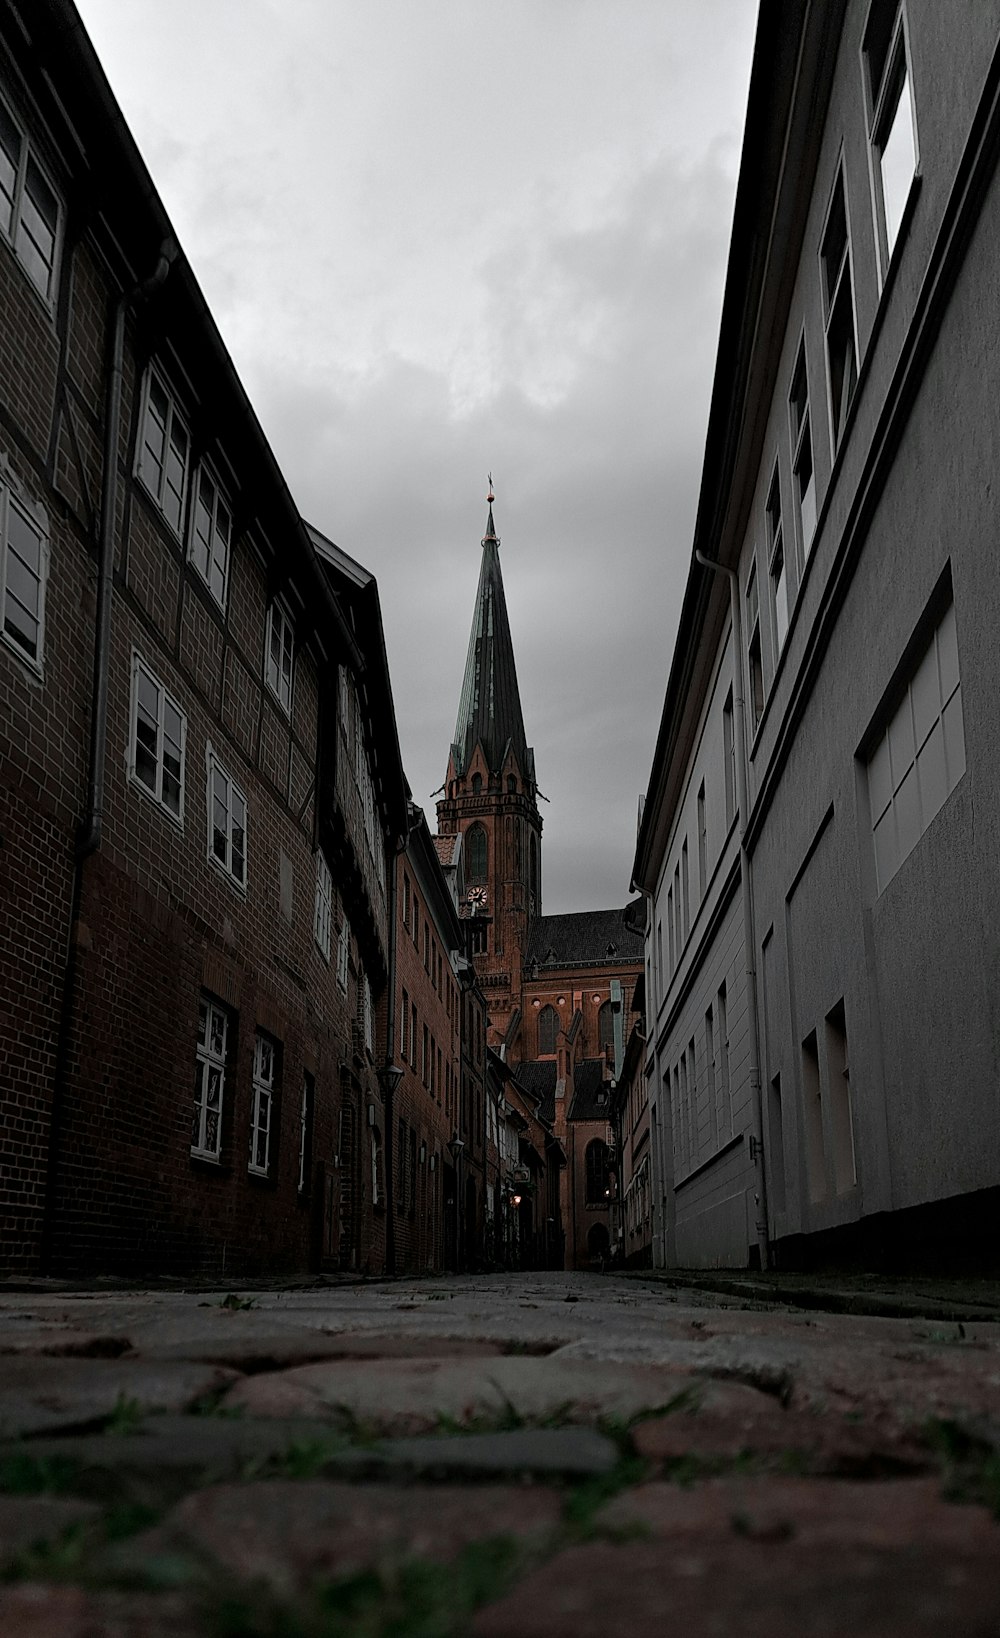 a dark alley with a church steeple in the background